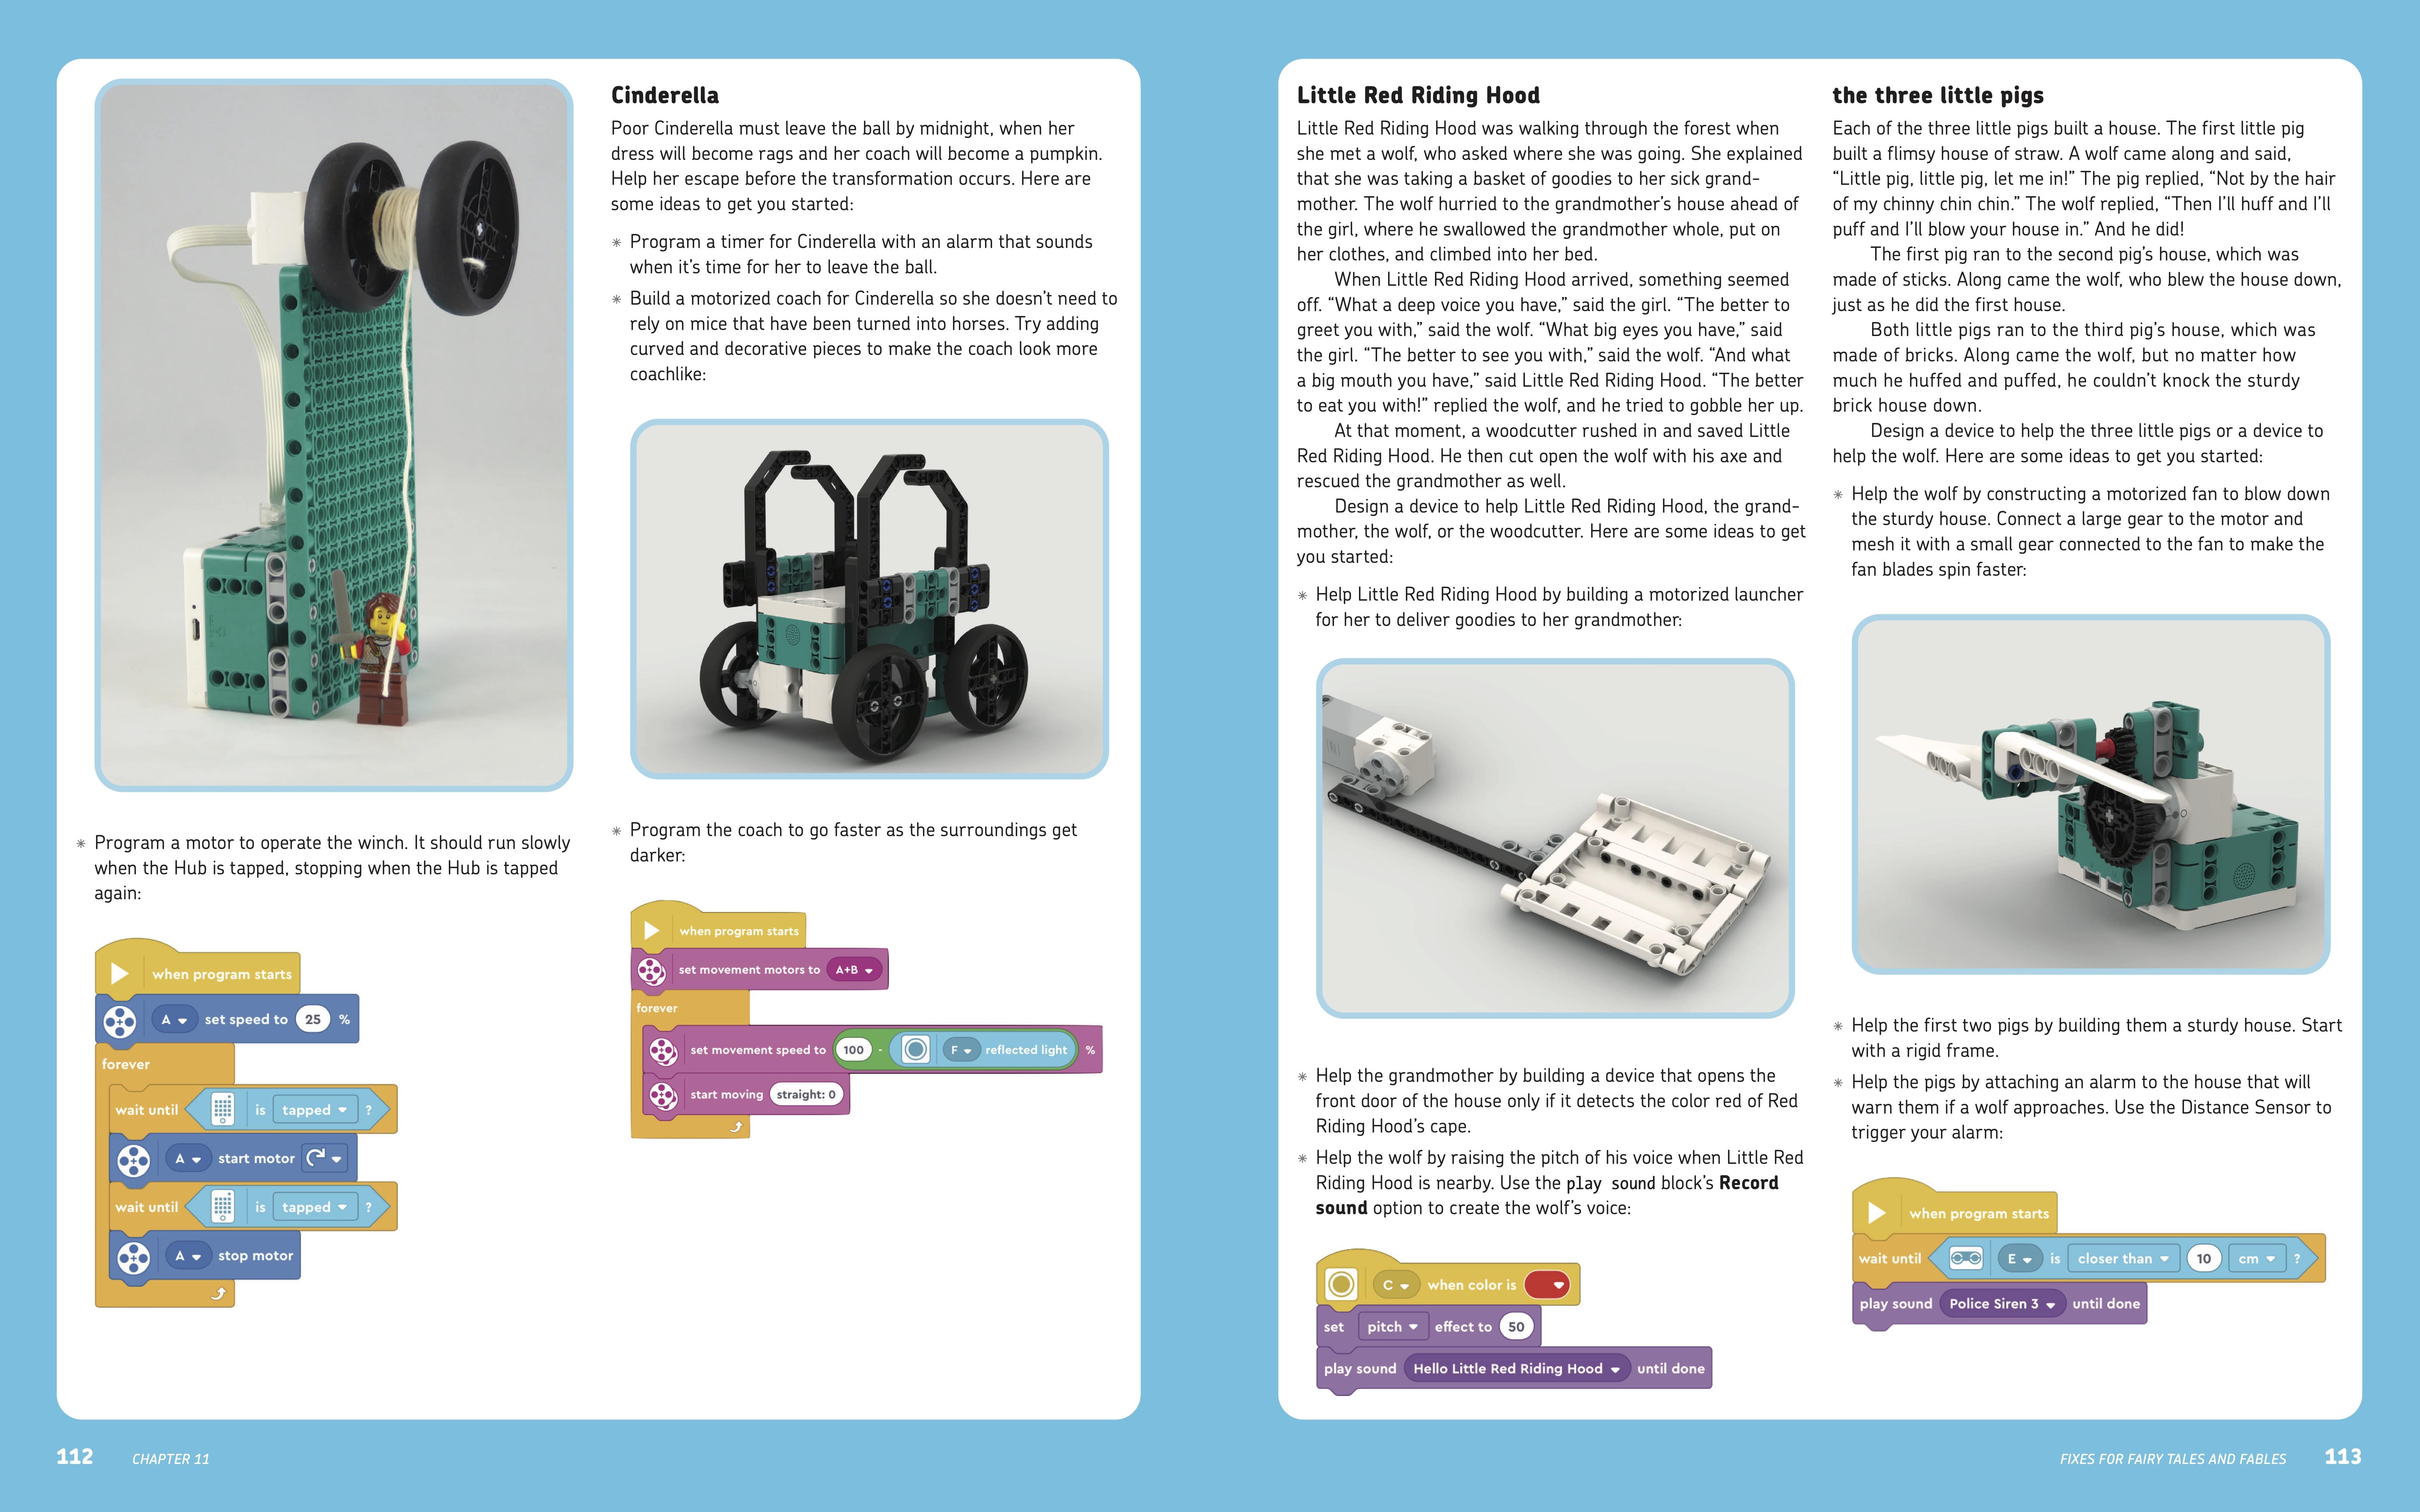 Getting Started with LEGO® MINDSTORMS pages